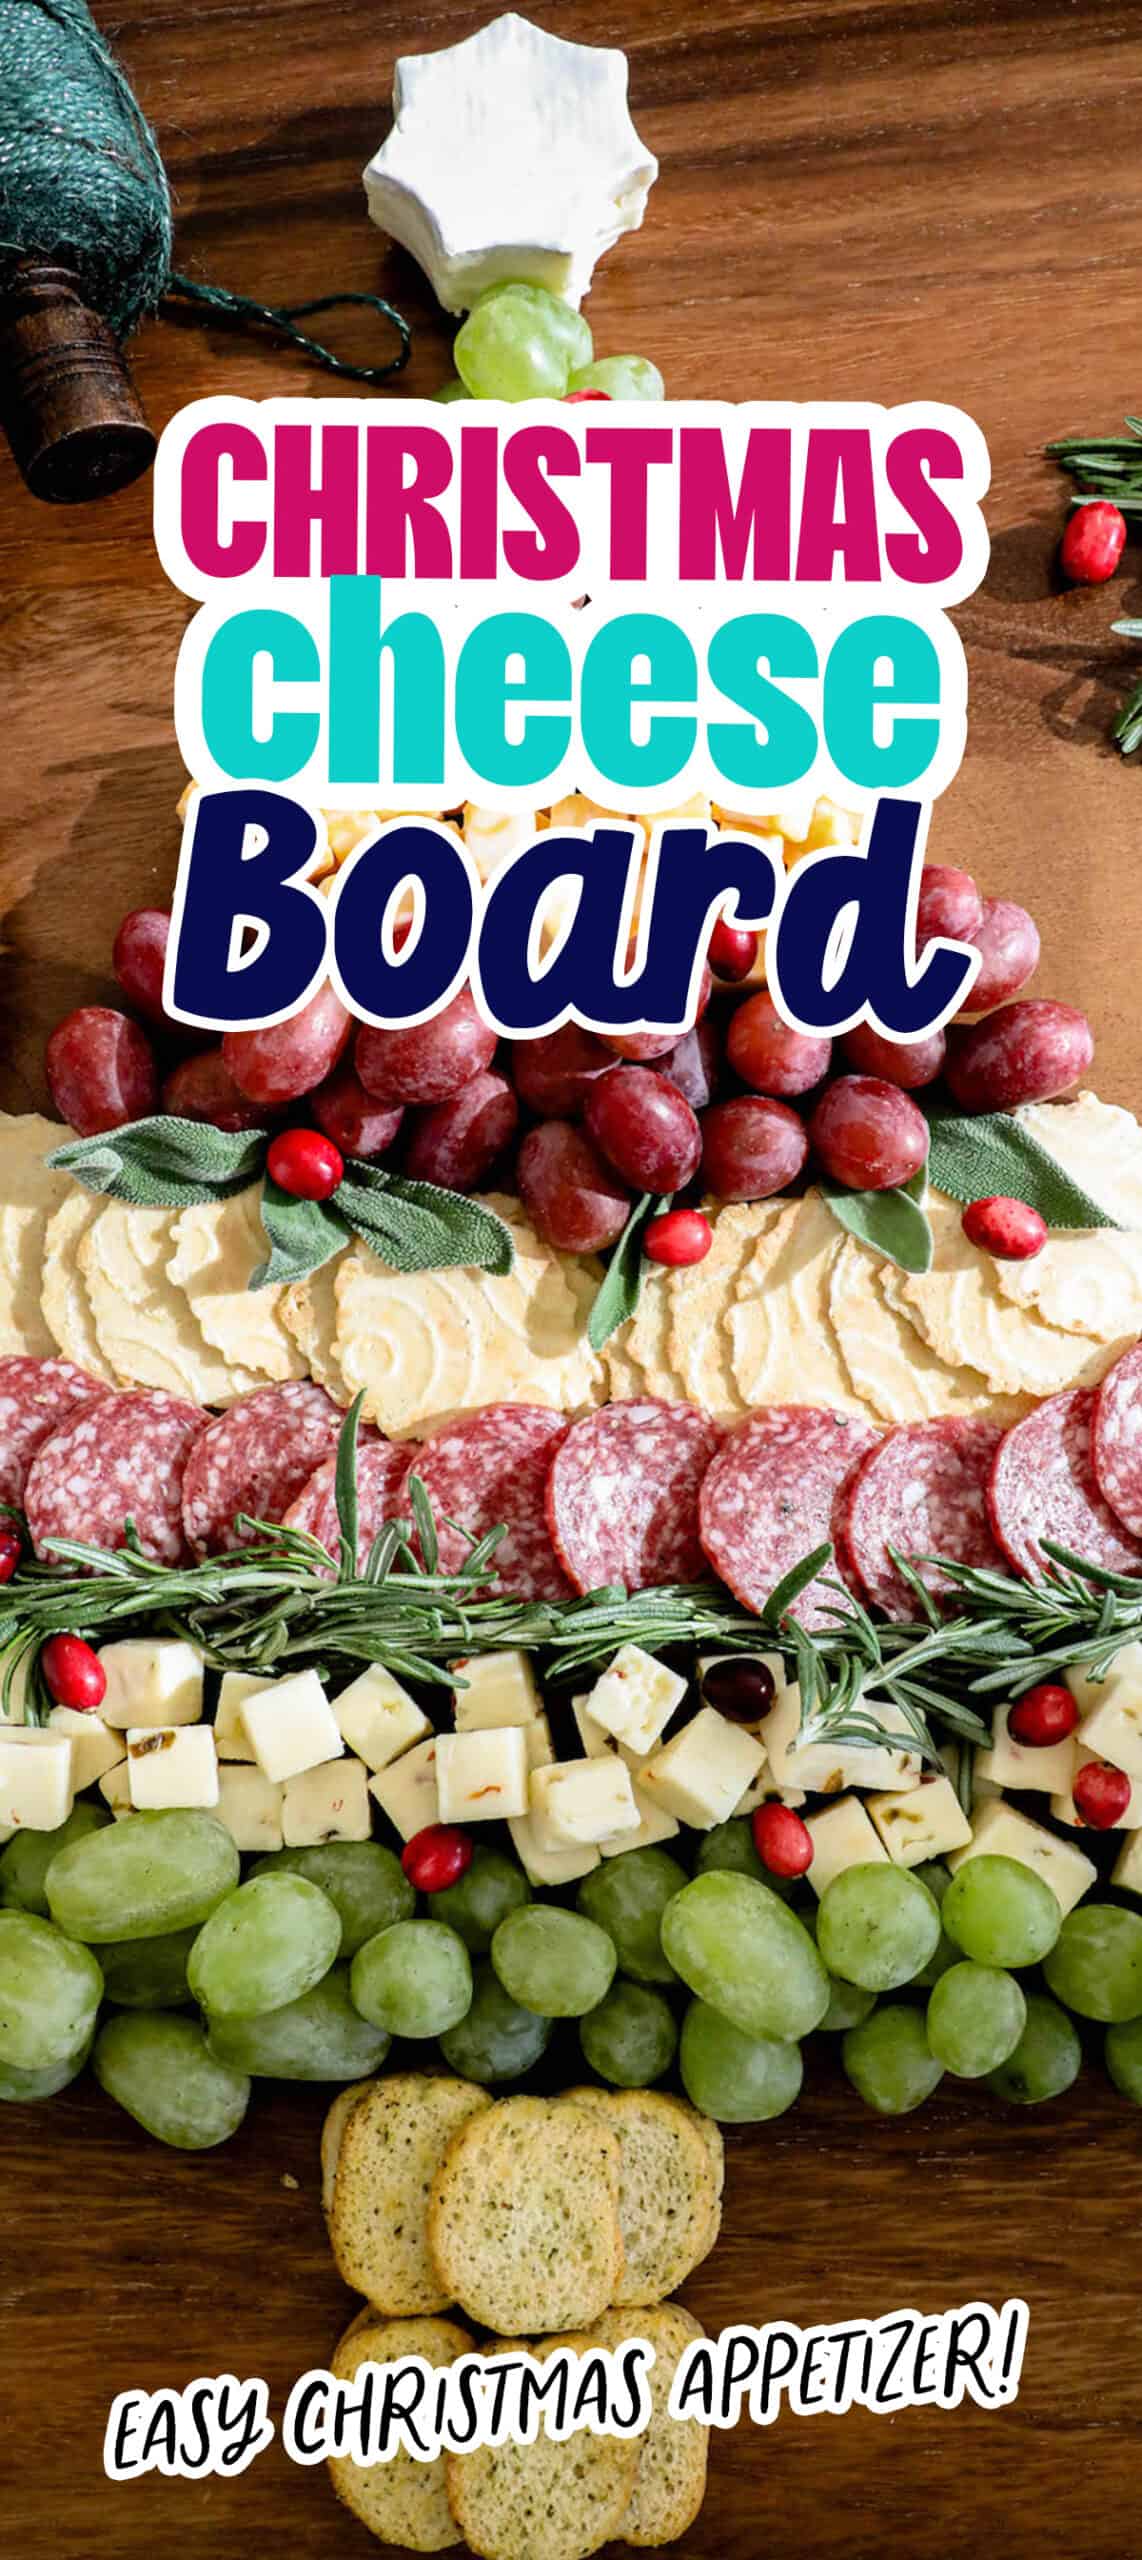 A festive Christmas cheese board adorned with an array of indulgent meats and cheeses.